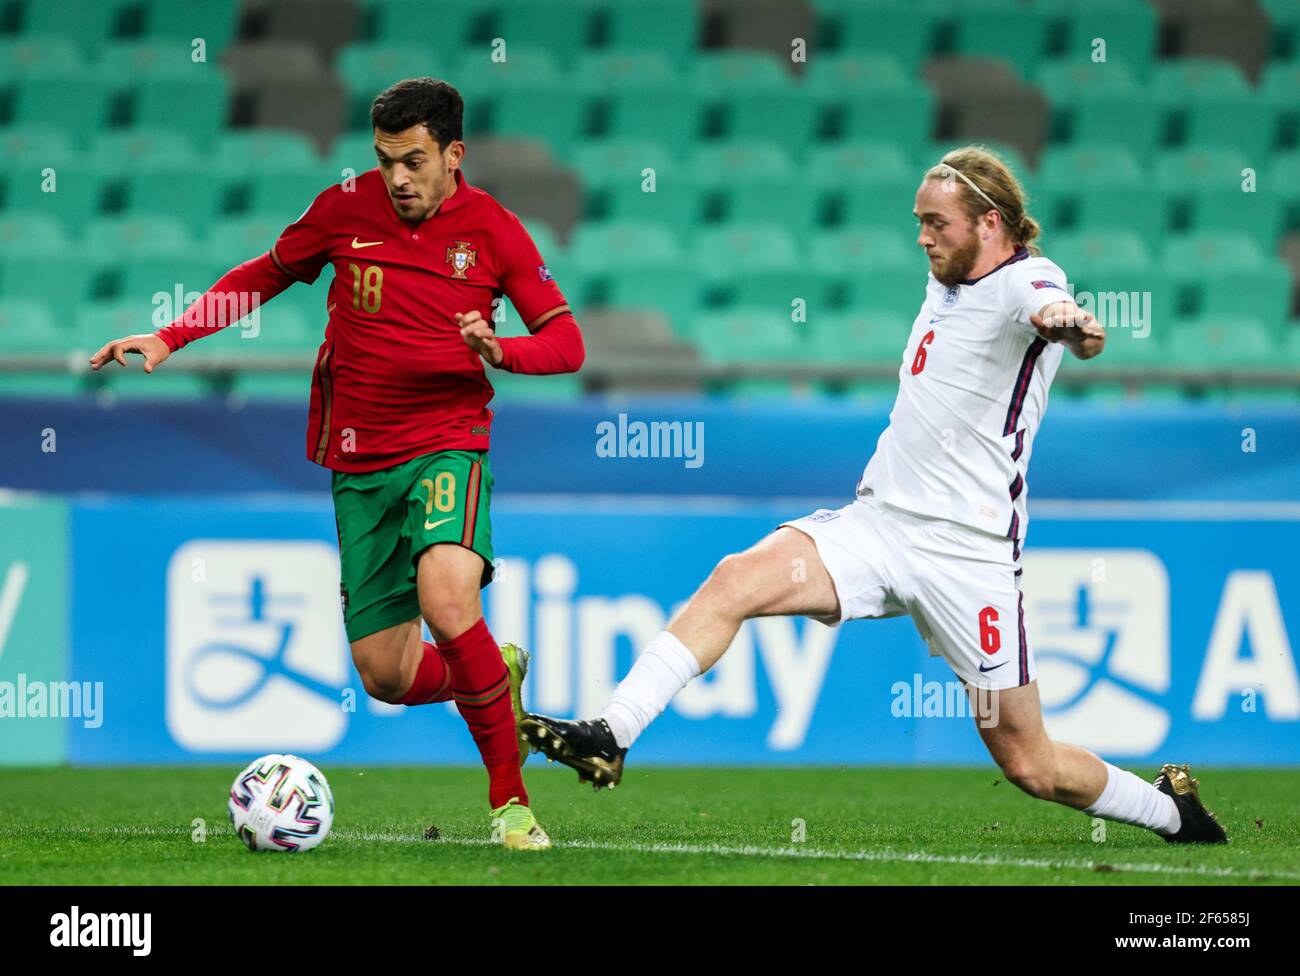 LJUBLJANA, SLOVENIA - MARCH 28: Pote of Portugal vs Tom Davies of England  during the 2021 UEFA European Under-21 Championship Group D match between  Portugal and England at Stadion Stozice on March